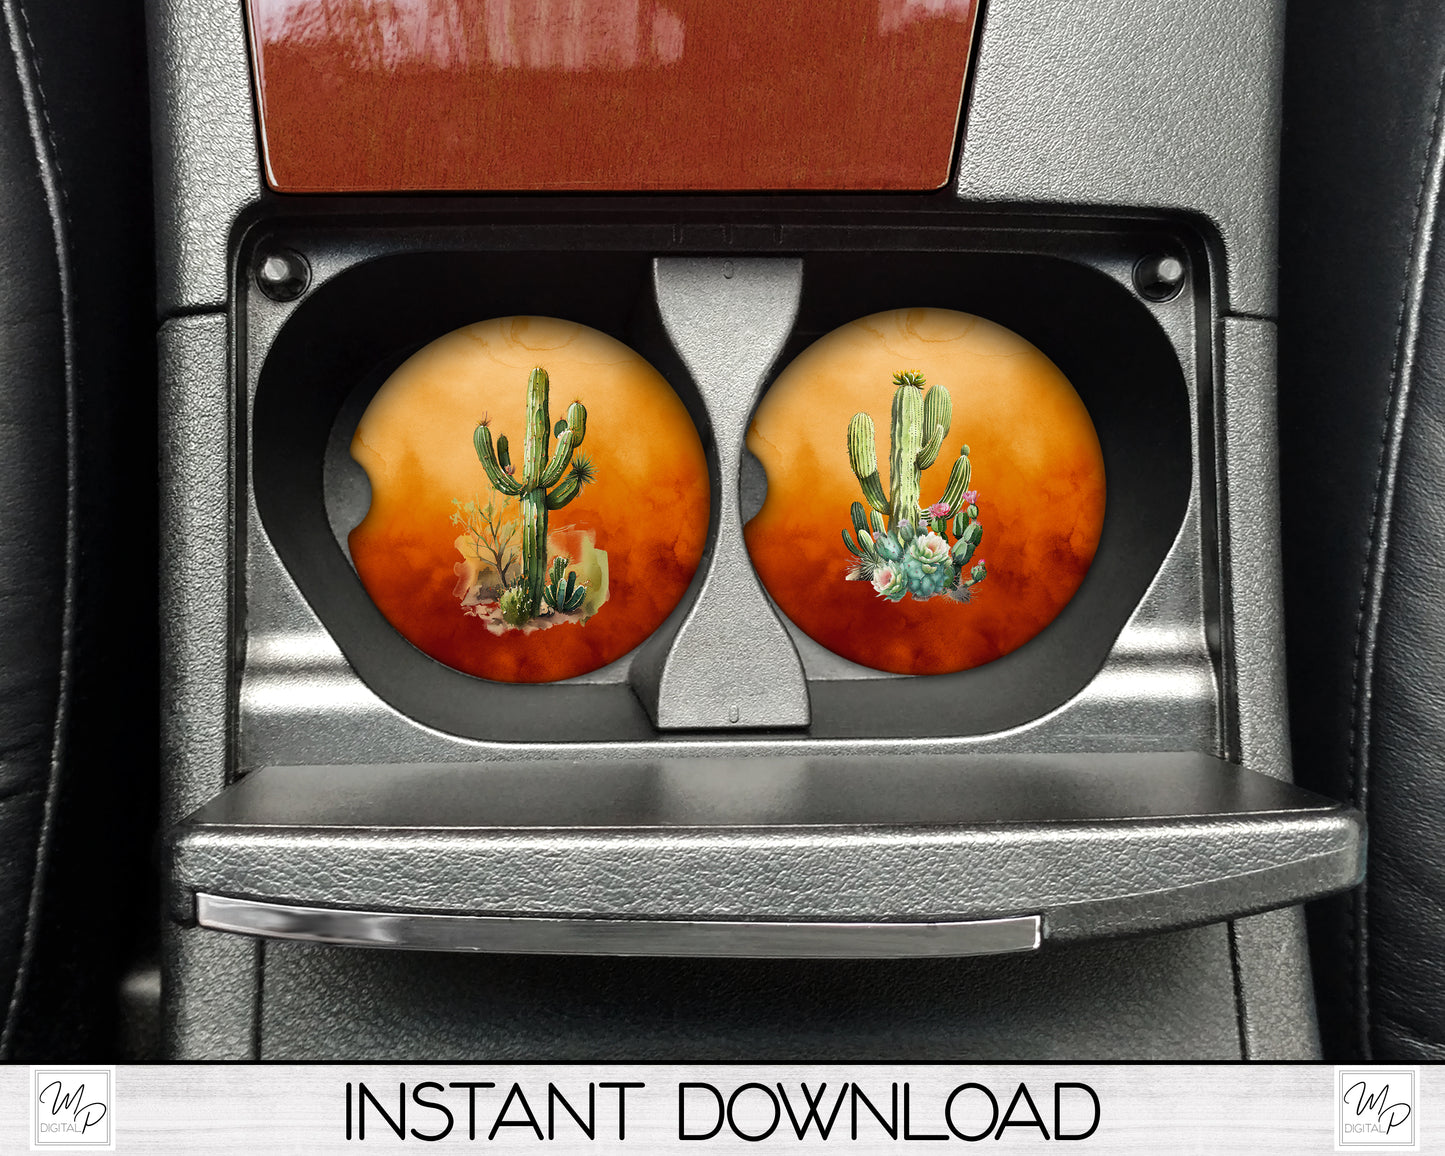 Set of 4 Desert Cactus Coaster Sublimation PNG Designs For Sublimation of Square and Round Coasters, Digital Download